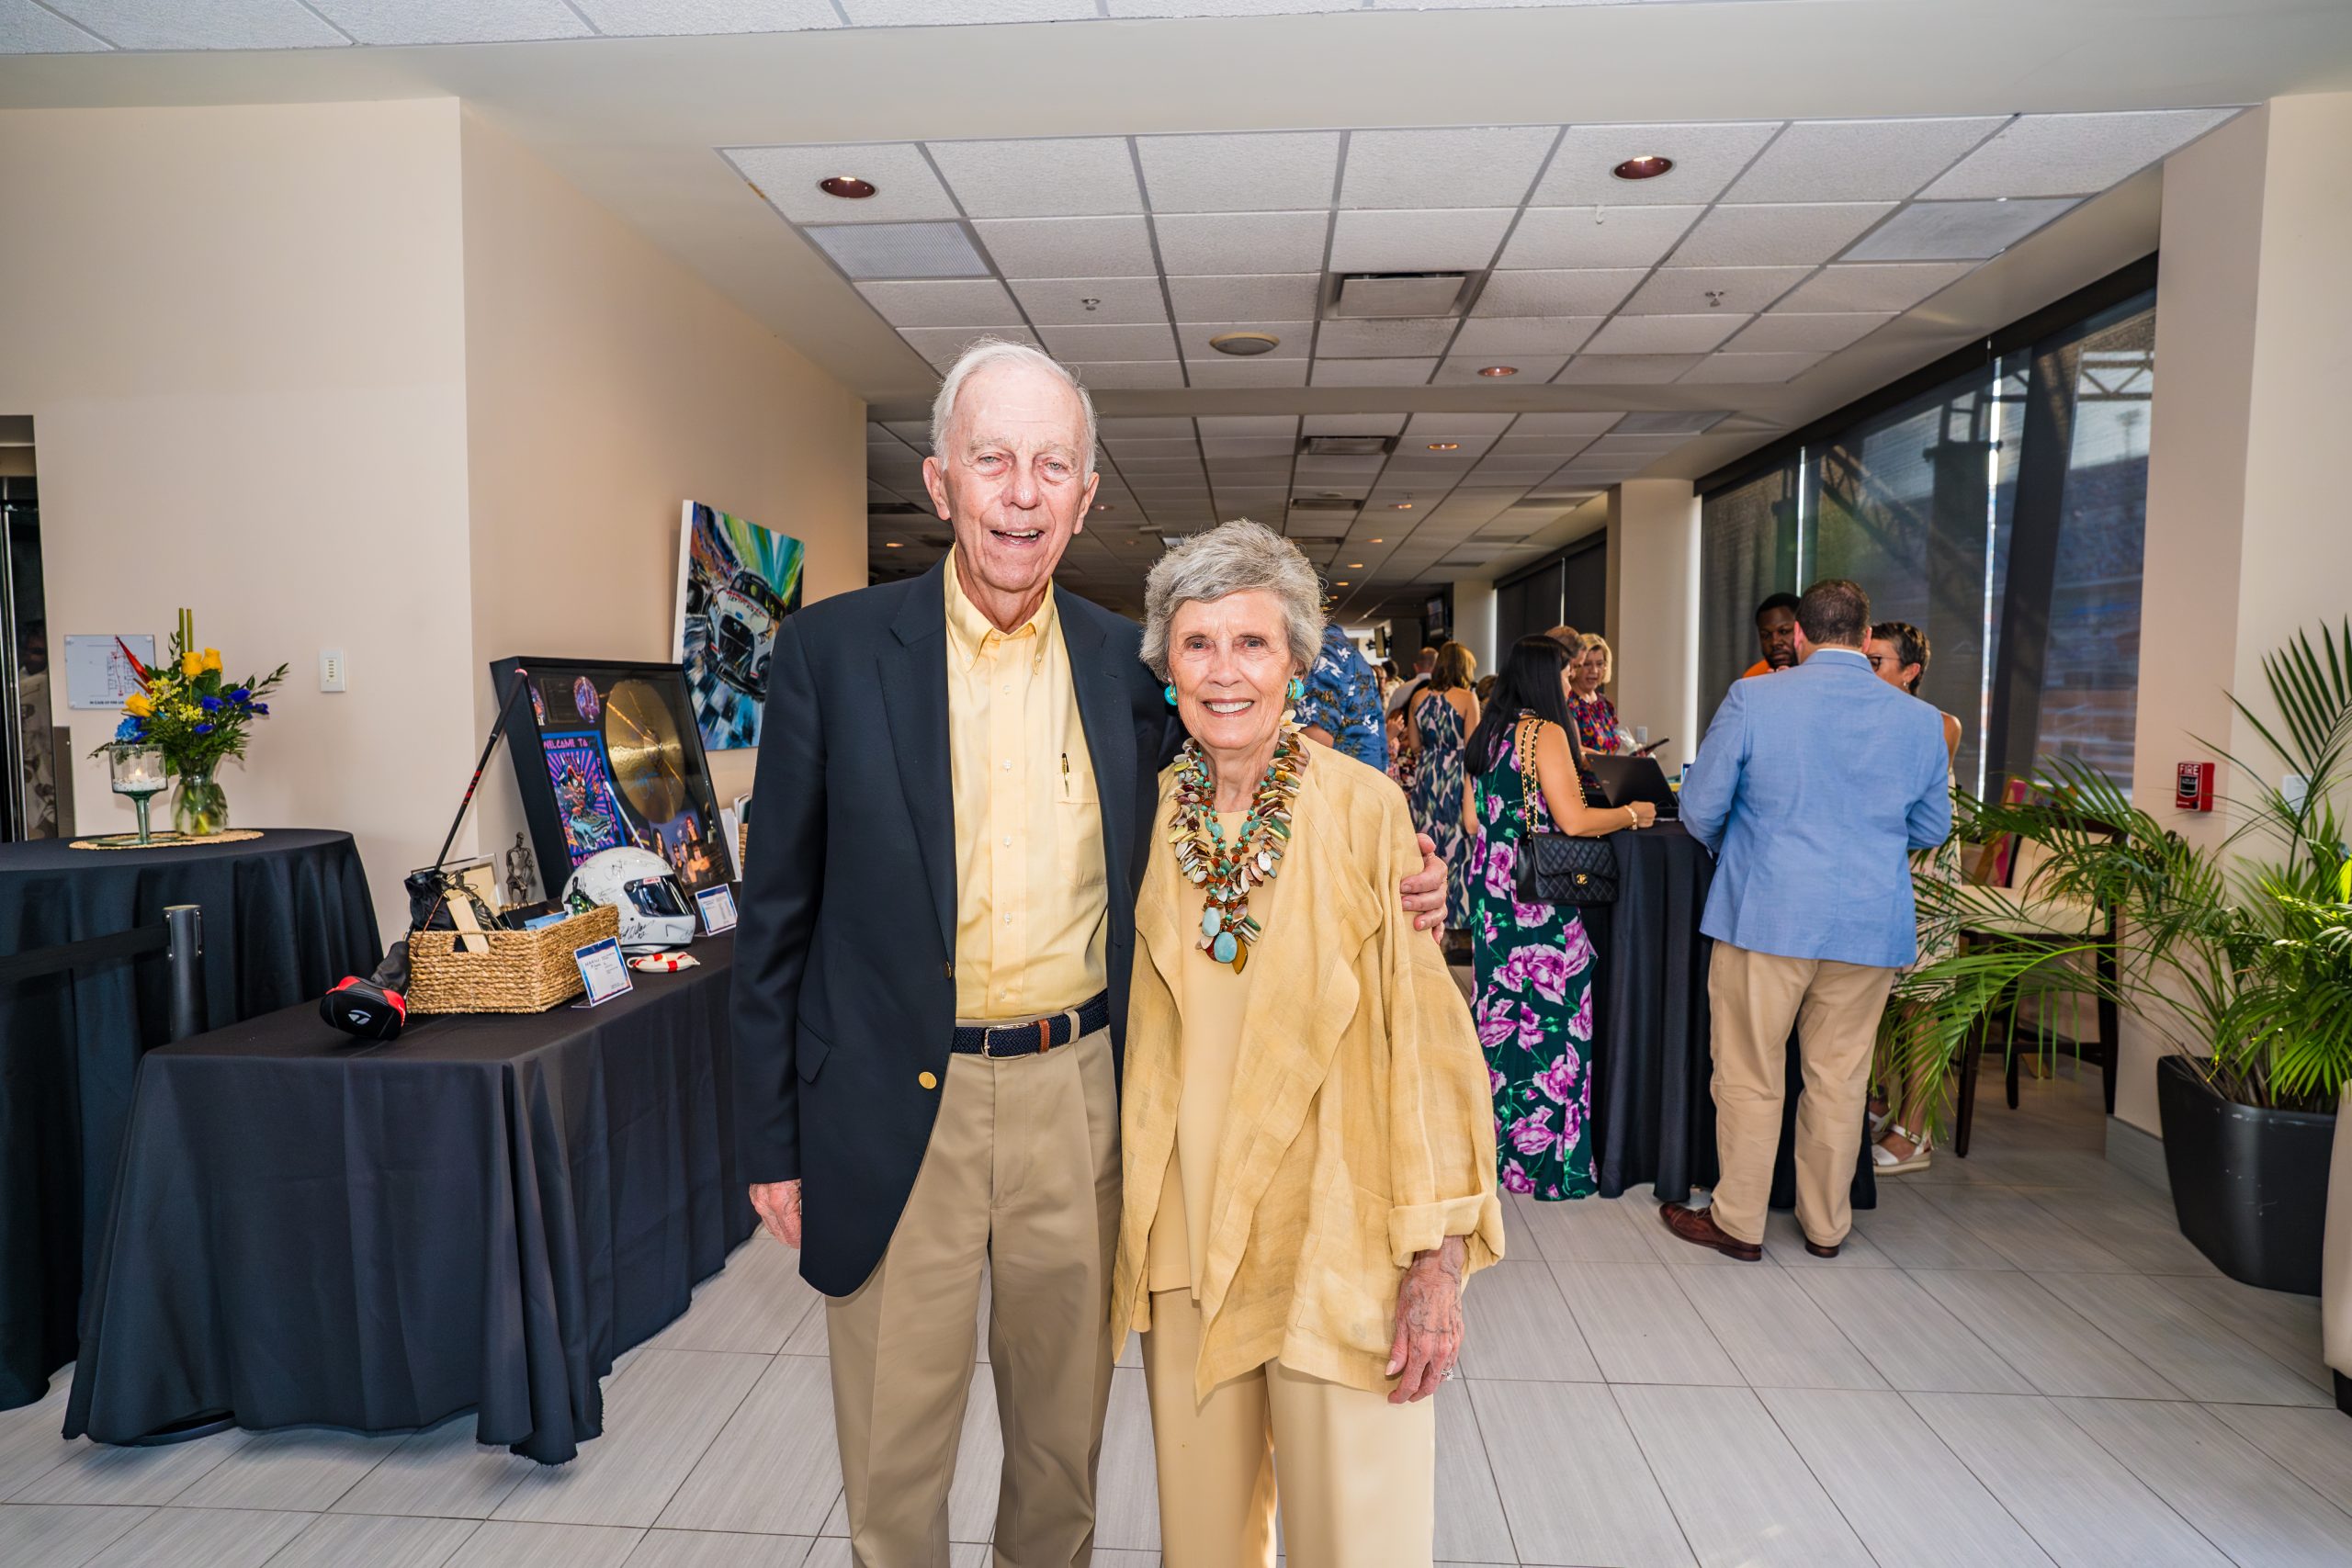 Hyatt & Cici Brown Donate $500,000 for West Volusia Outpatient Center, Expanding and Consolidating SMA Healthcare Services